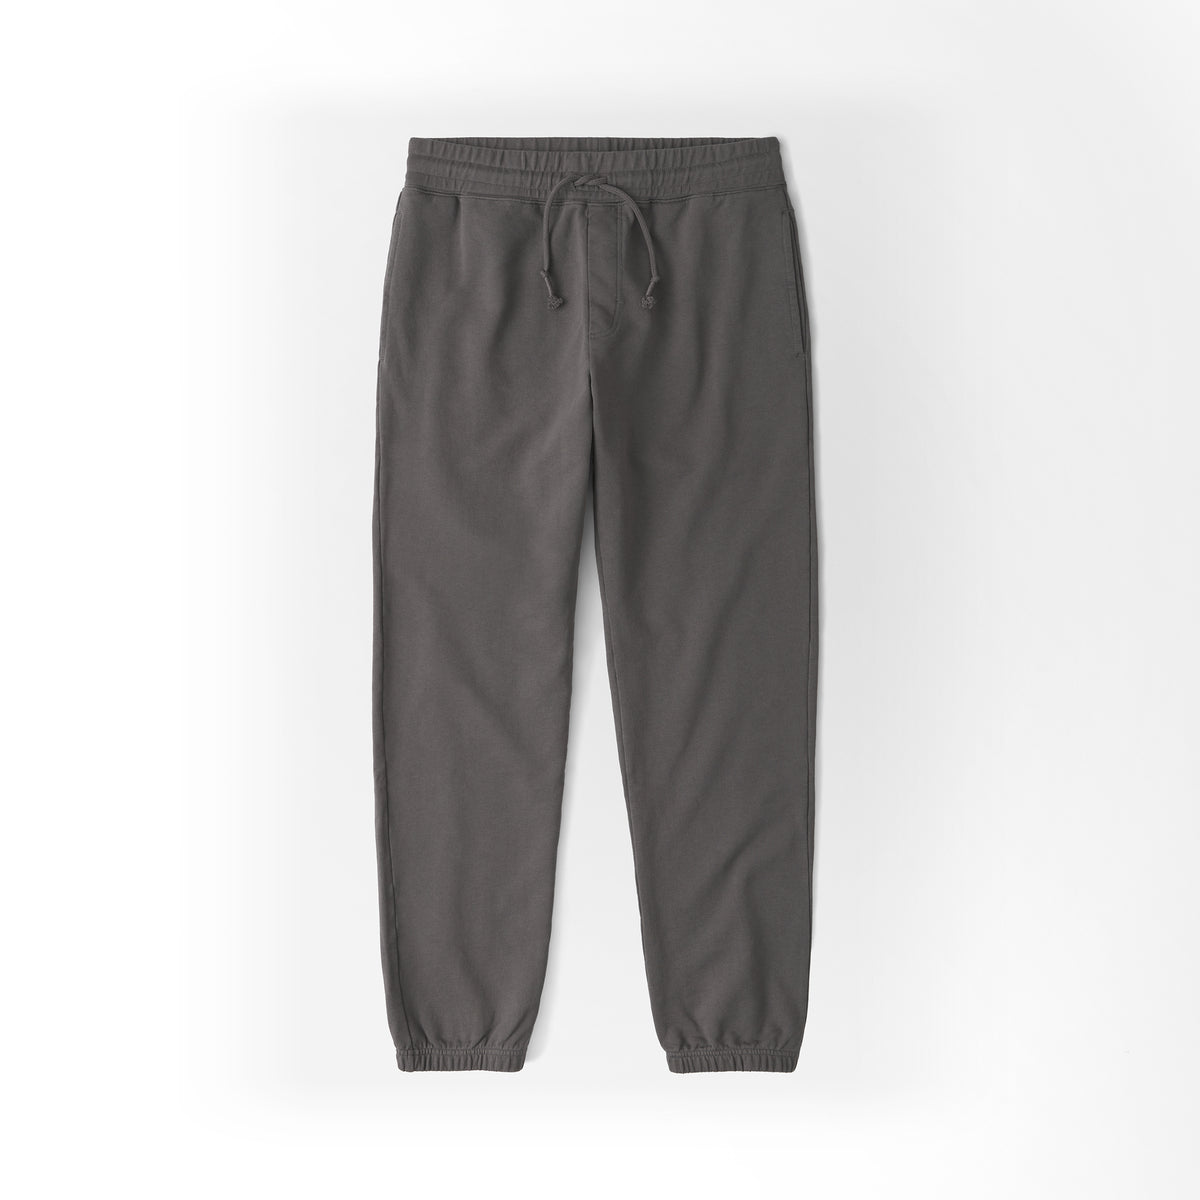 Sweatpant Charcoal made from Organic Cotton - Unrecorded - Front Men - Only Men